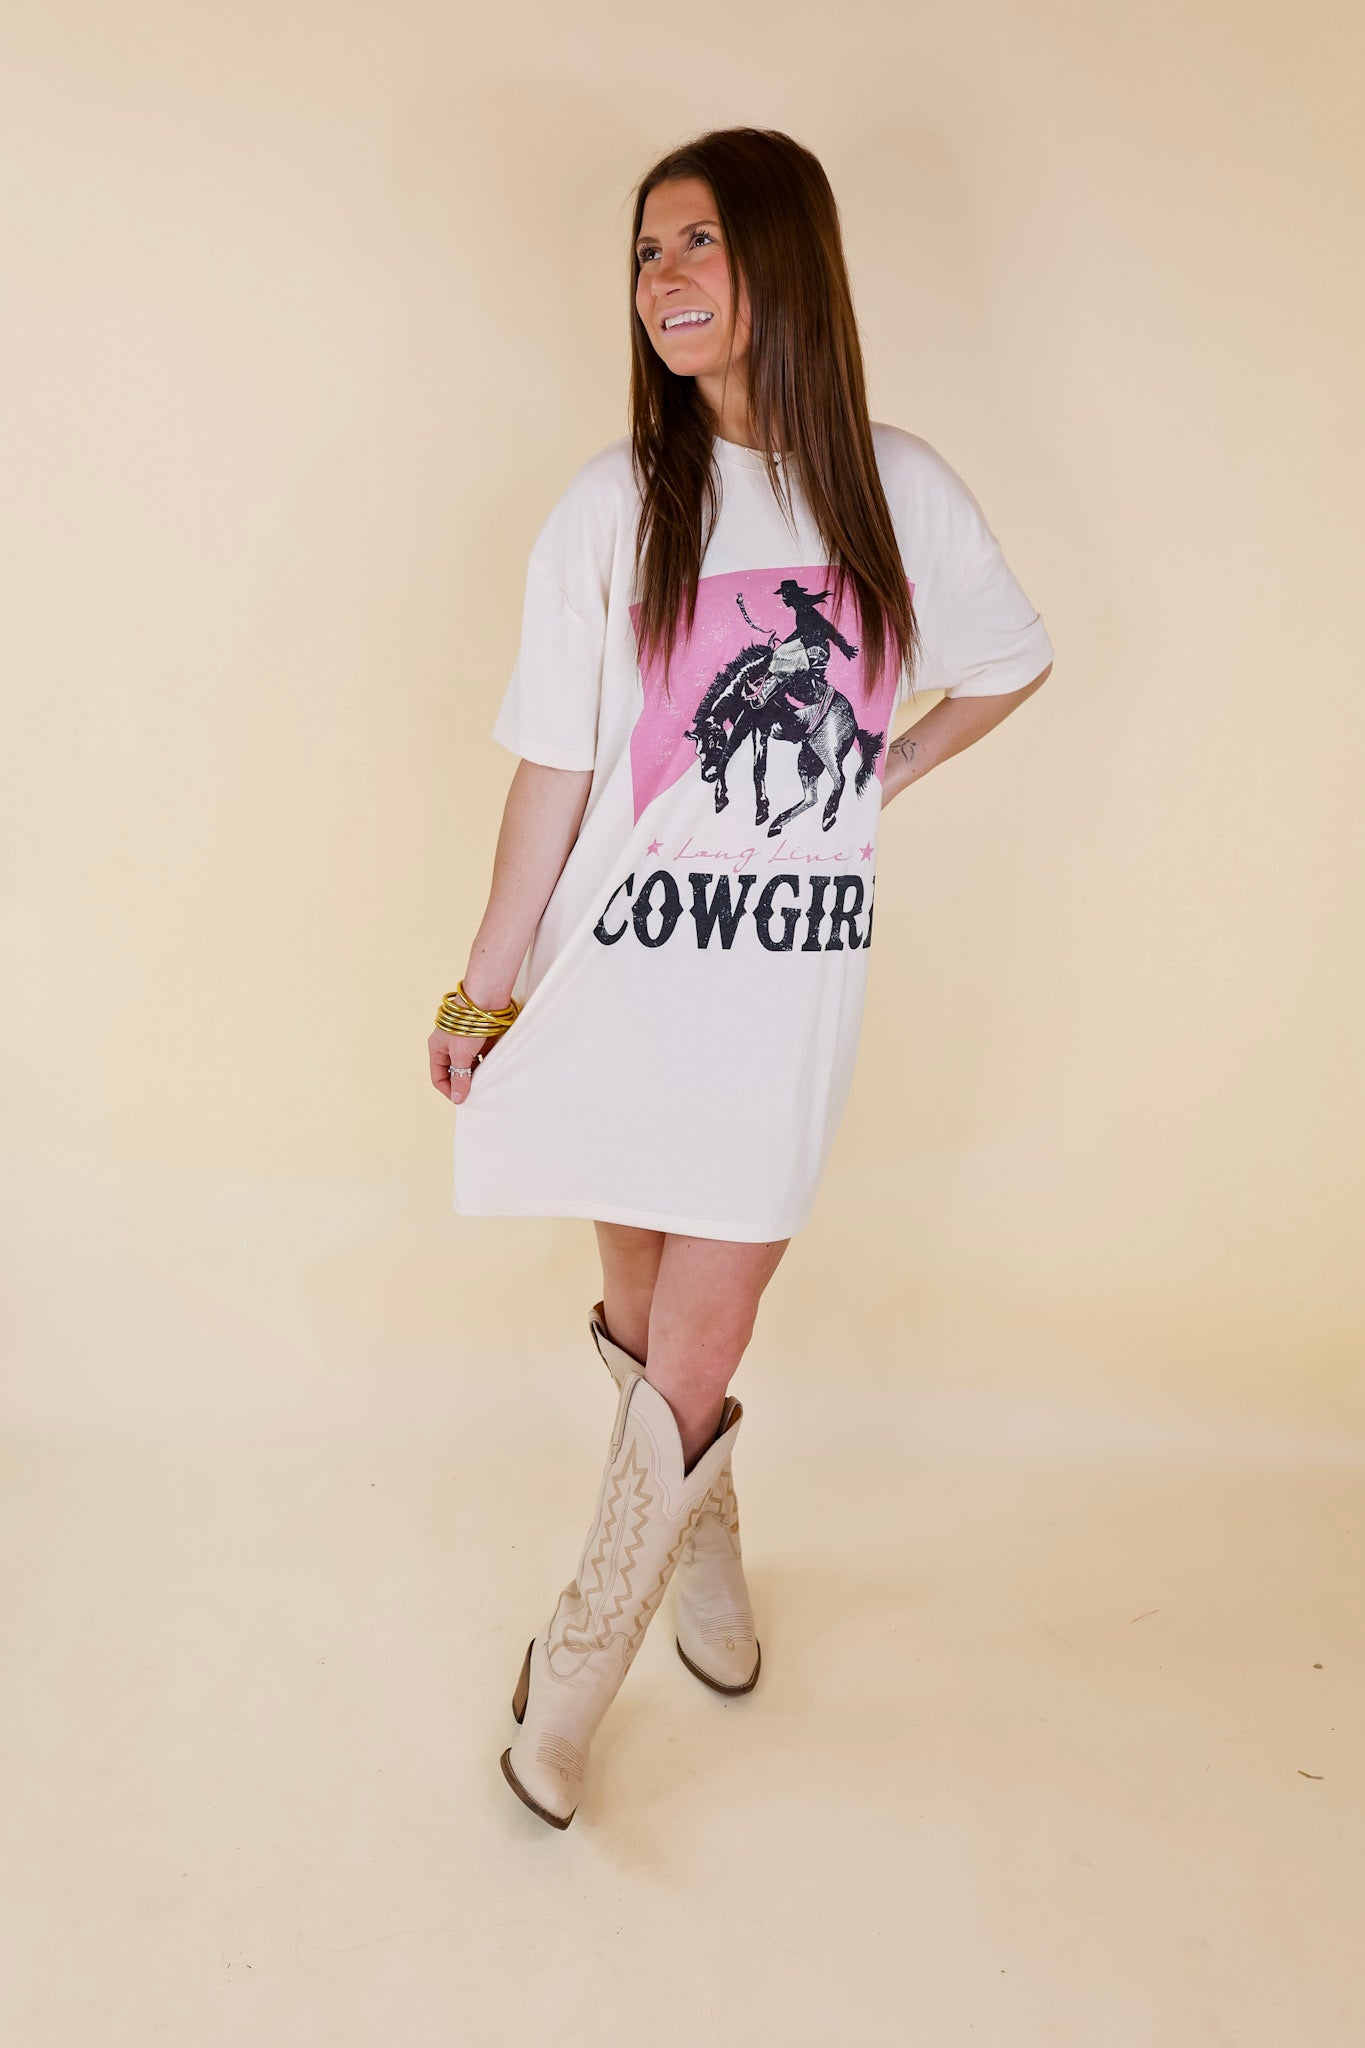 Long Live Cowgirl Short Sleeve Tee Shirt Dress in Cream - Giddy Up Glamour Boutique